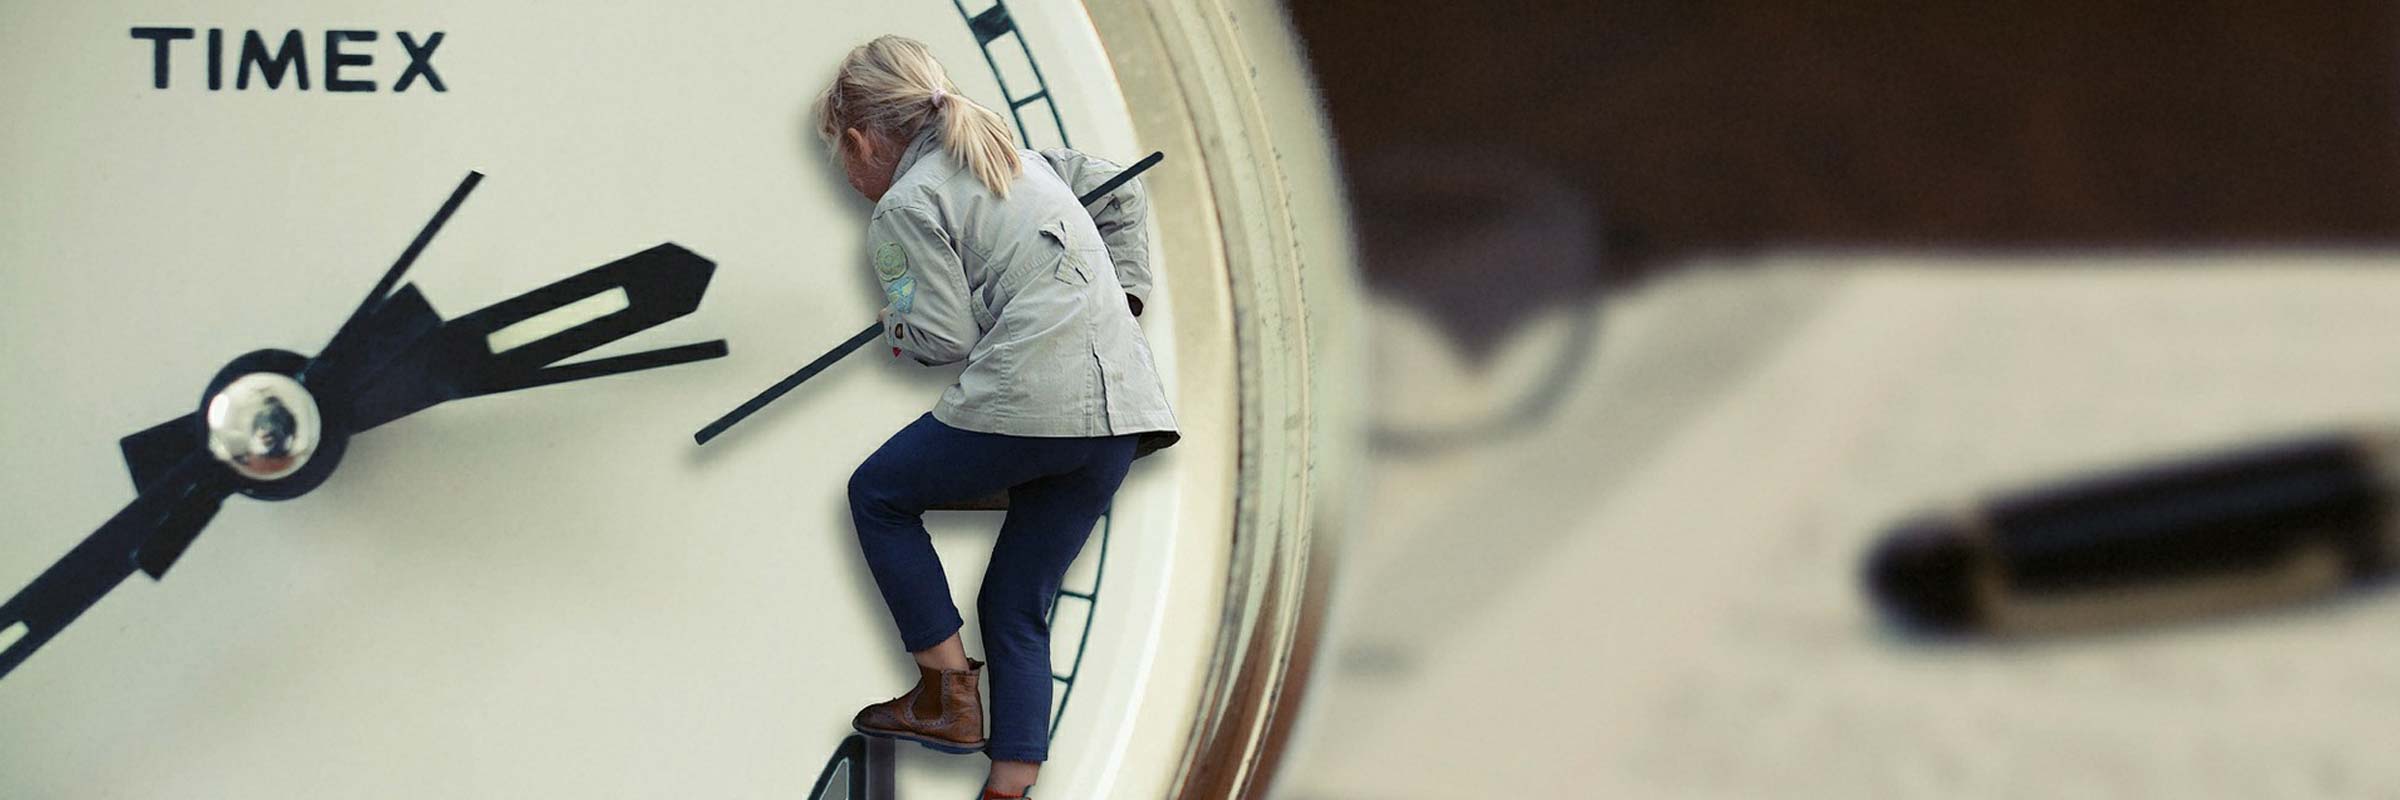 A child climbs on the face of a clock